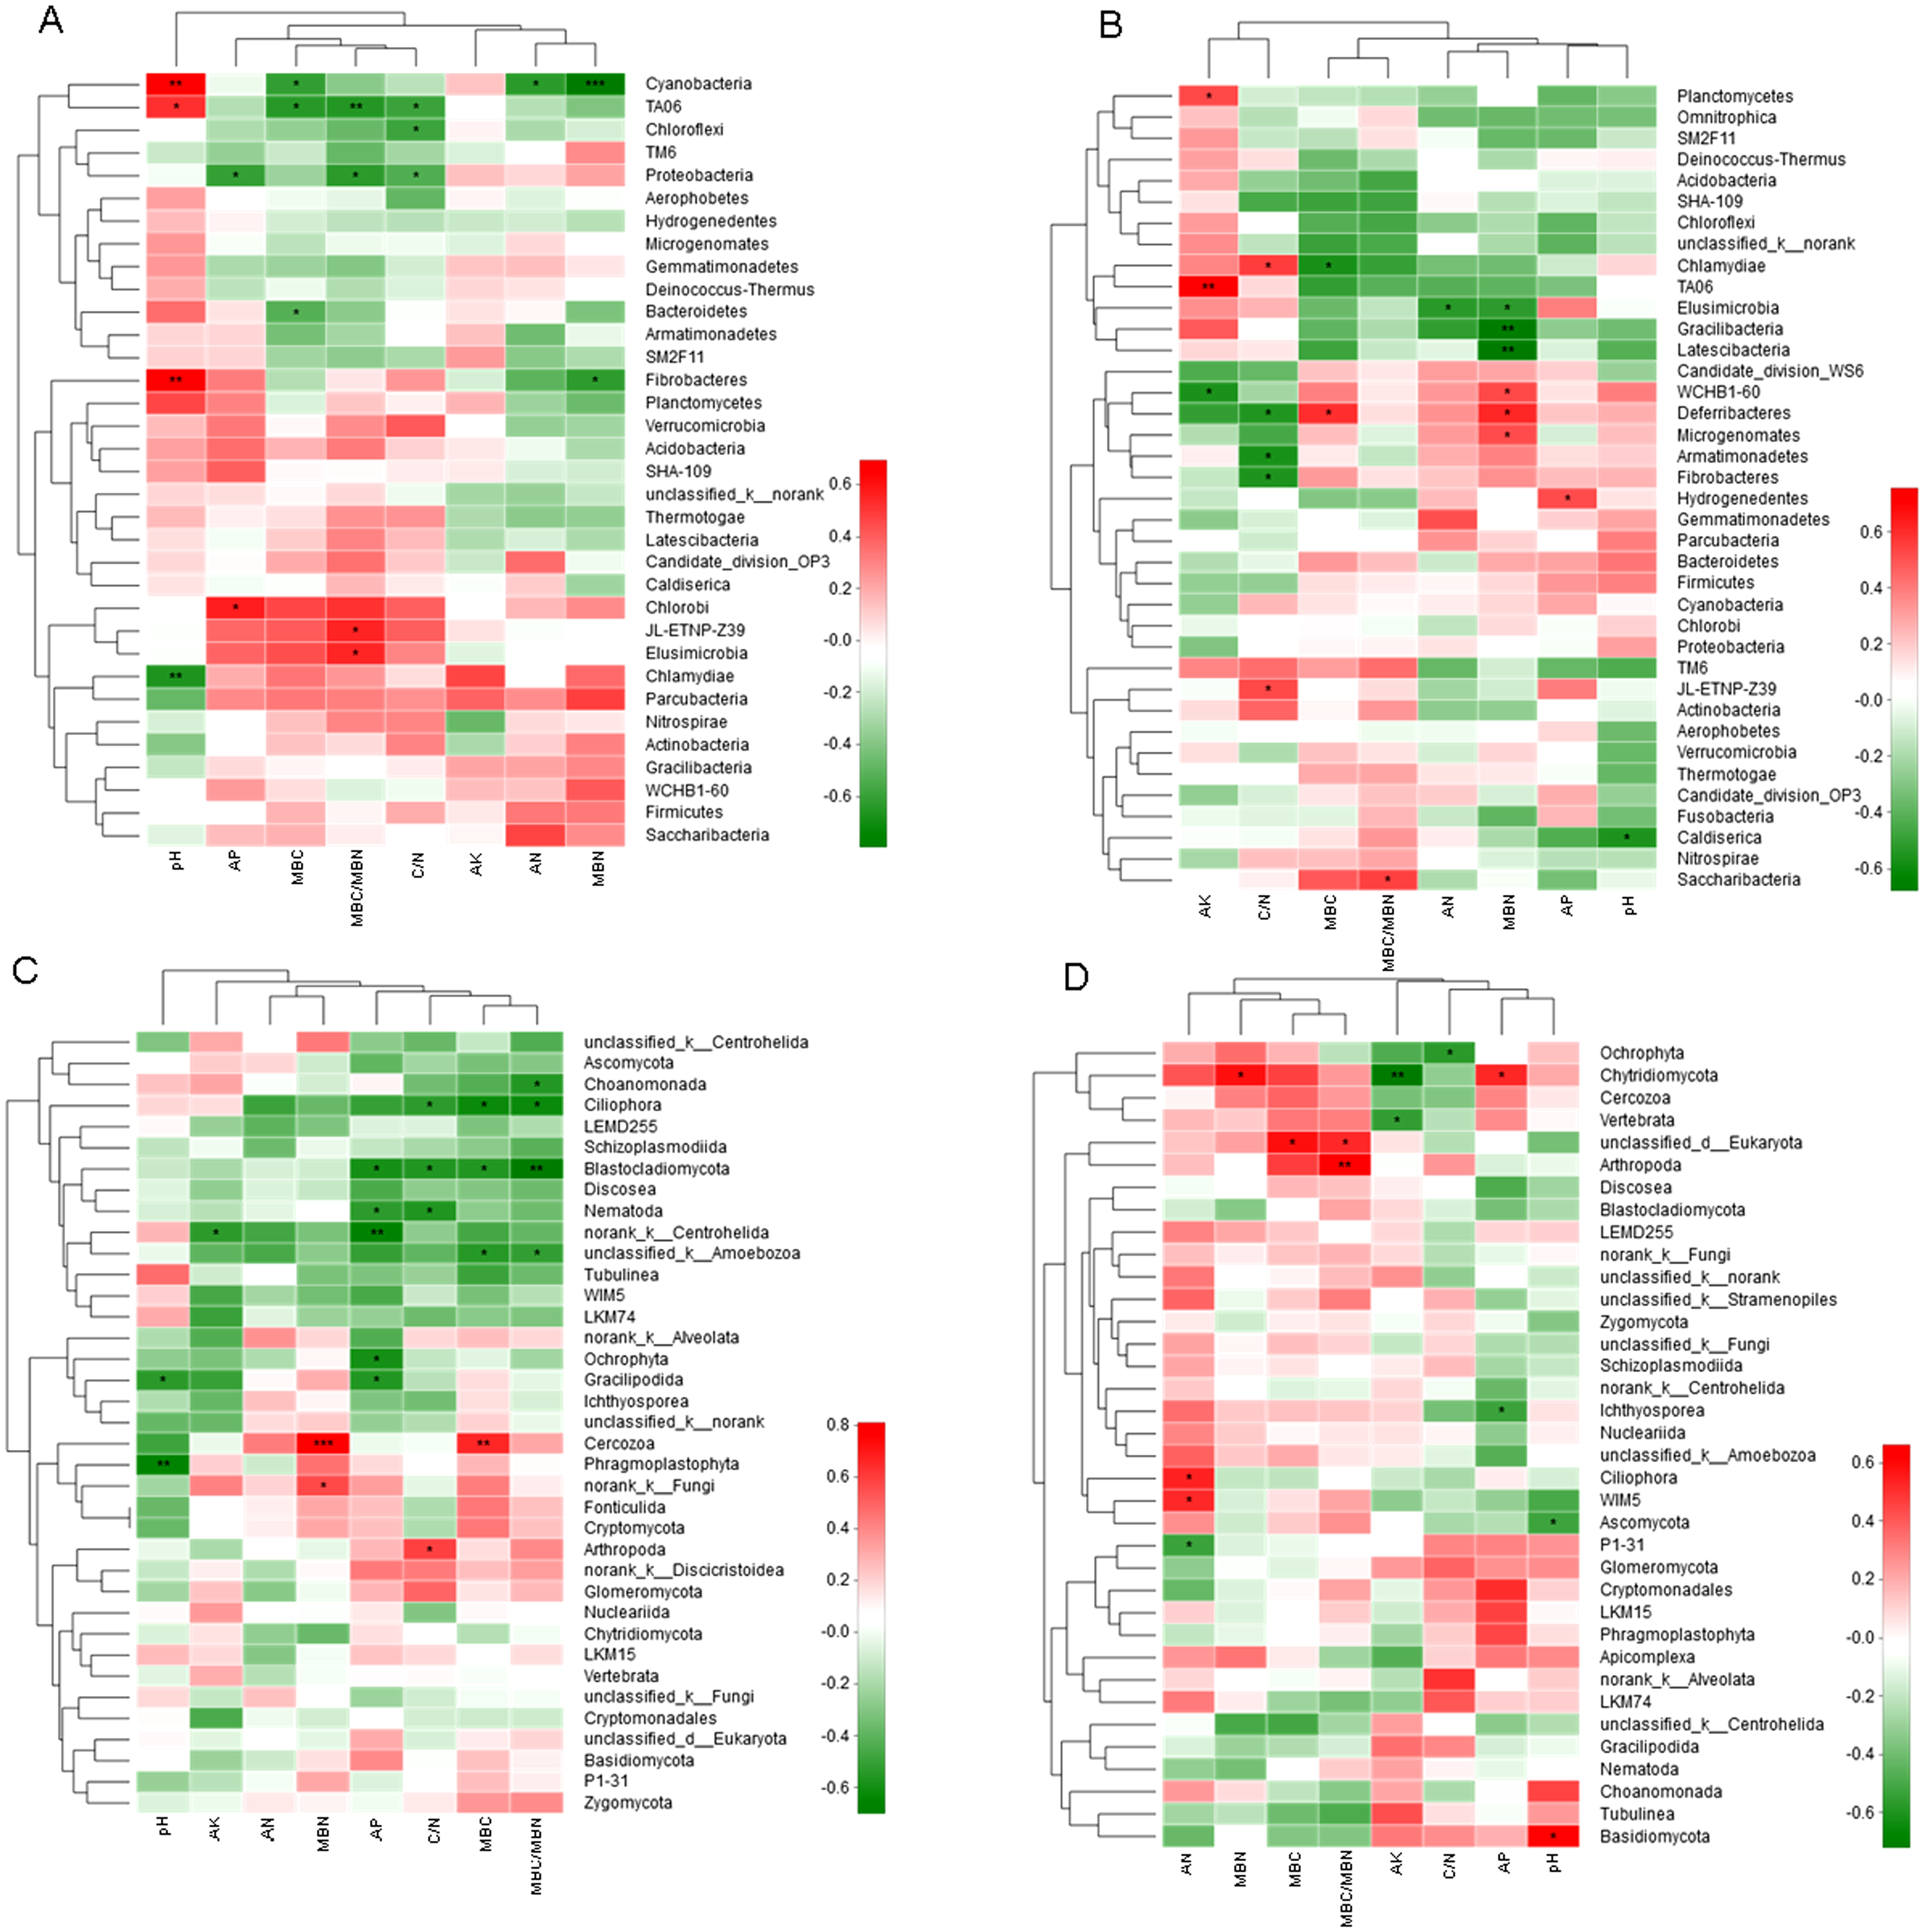 Effects Of Fertilizations On Soil Bacteria And Fungi Communities In A Degraded Arid Steppe Revealed By High Through Put Sequencing Peerj